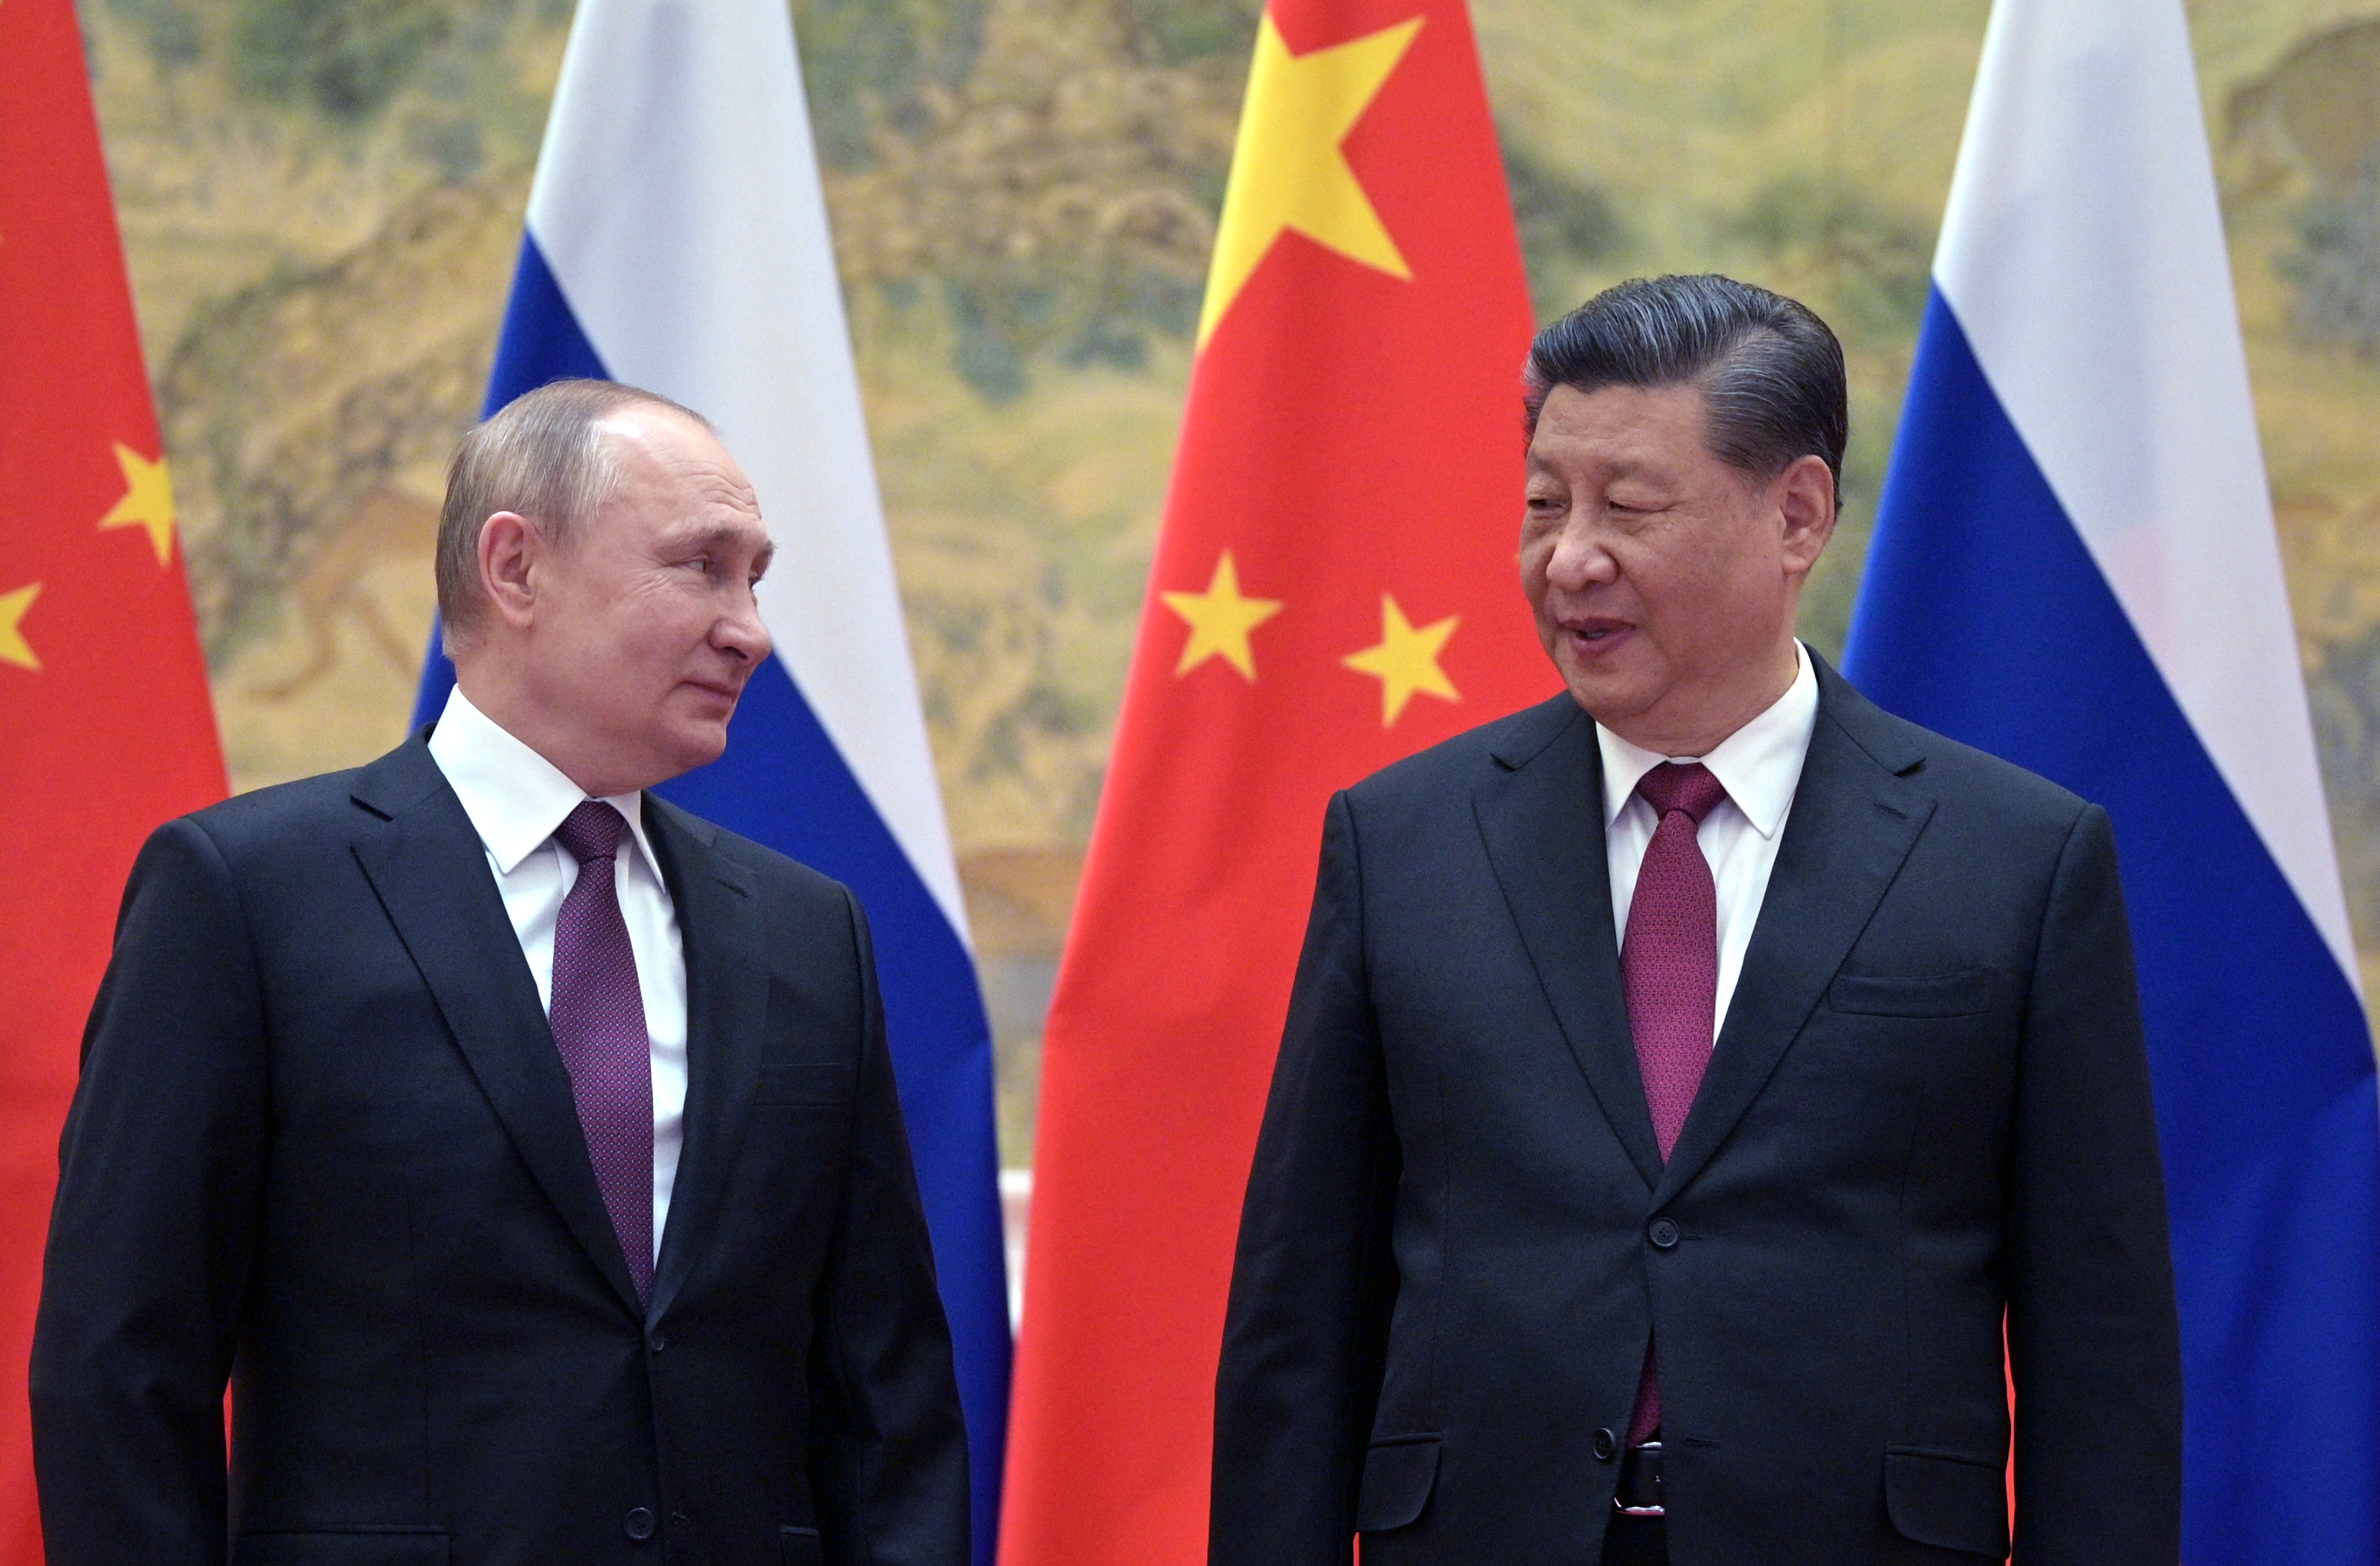 China and Russia are joining forces to spread disinformation